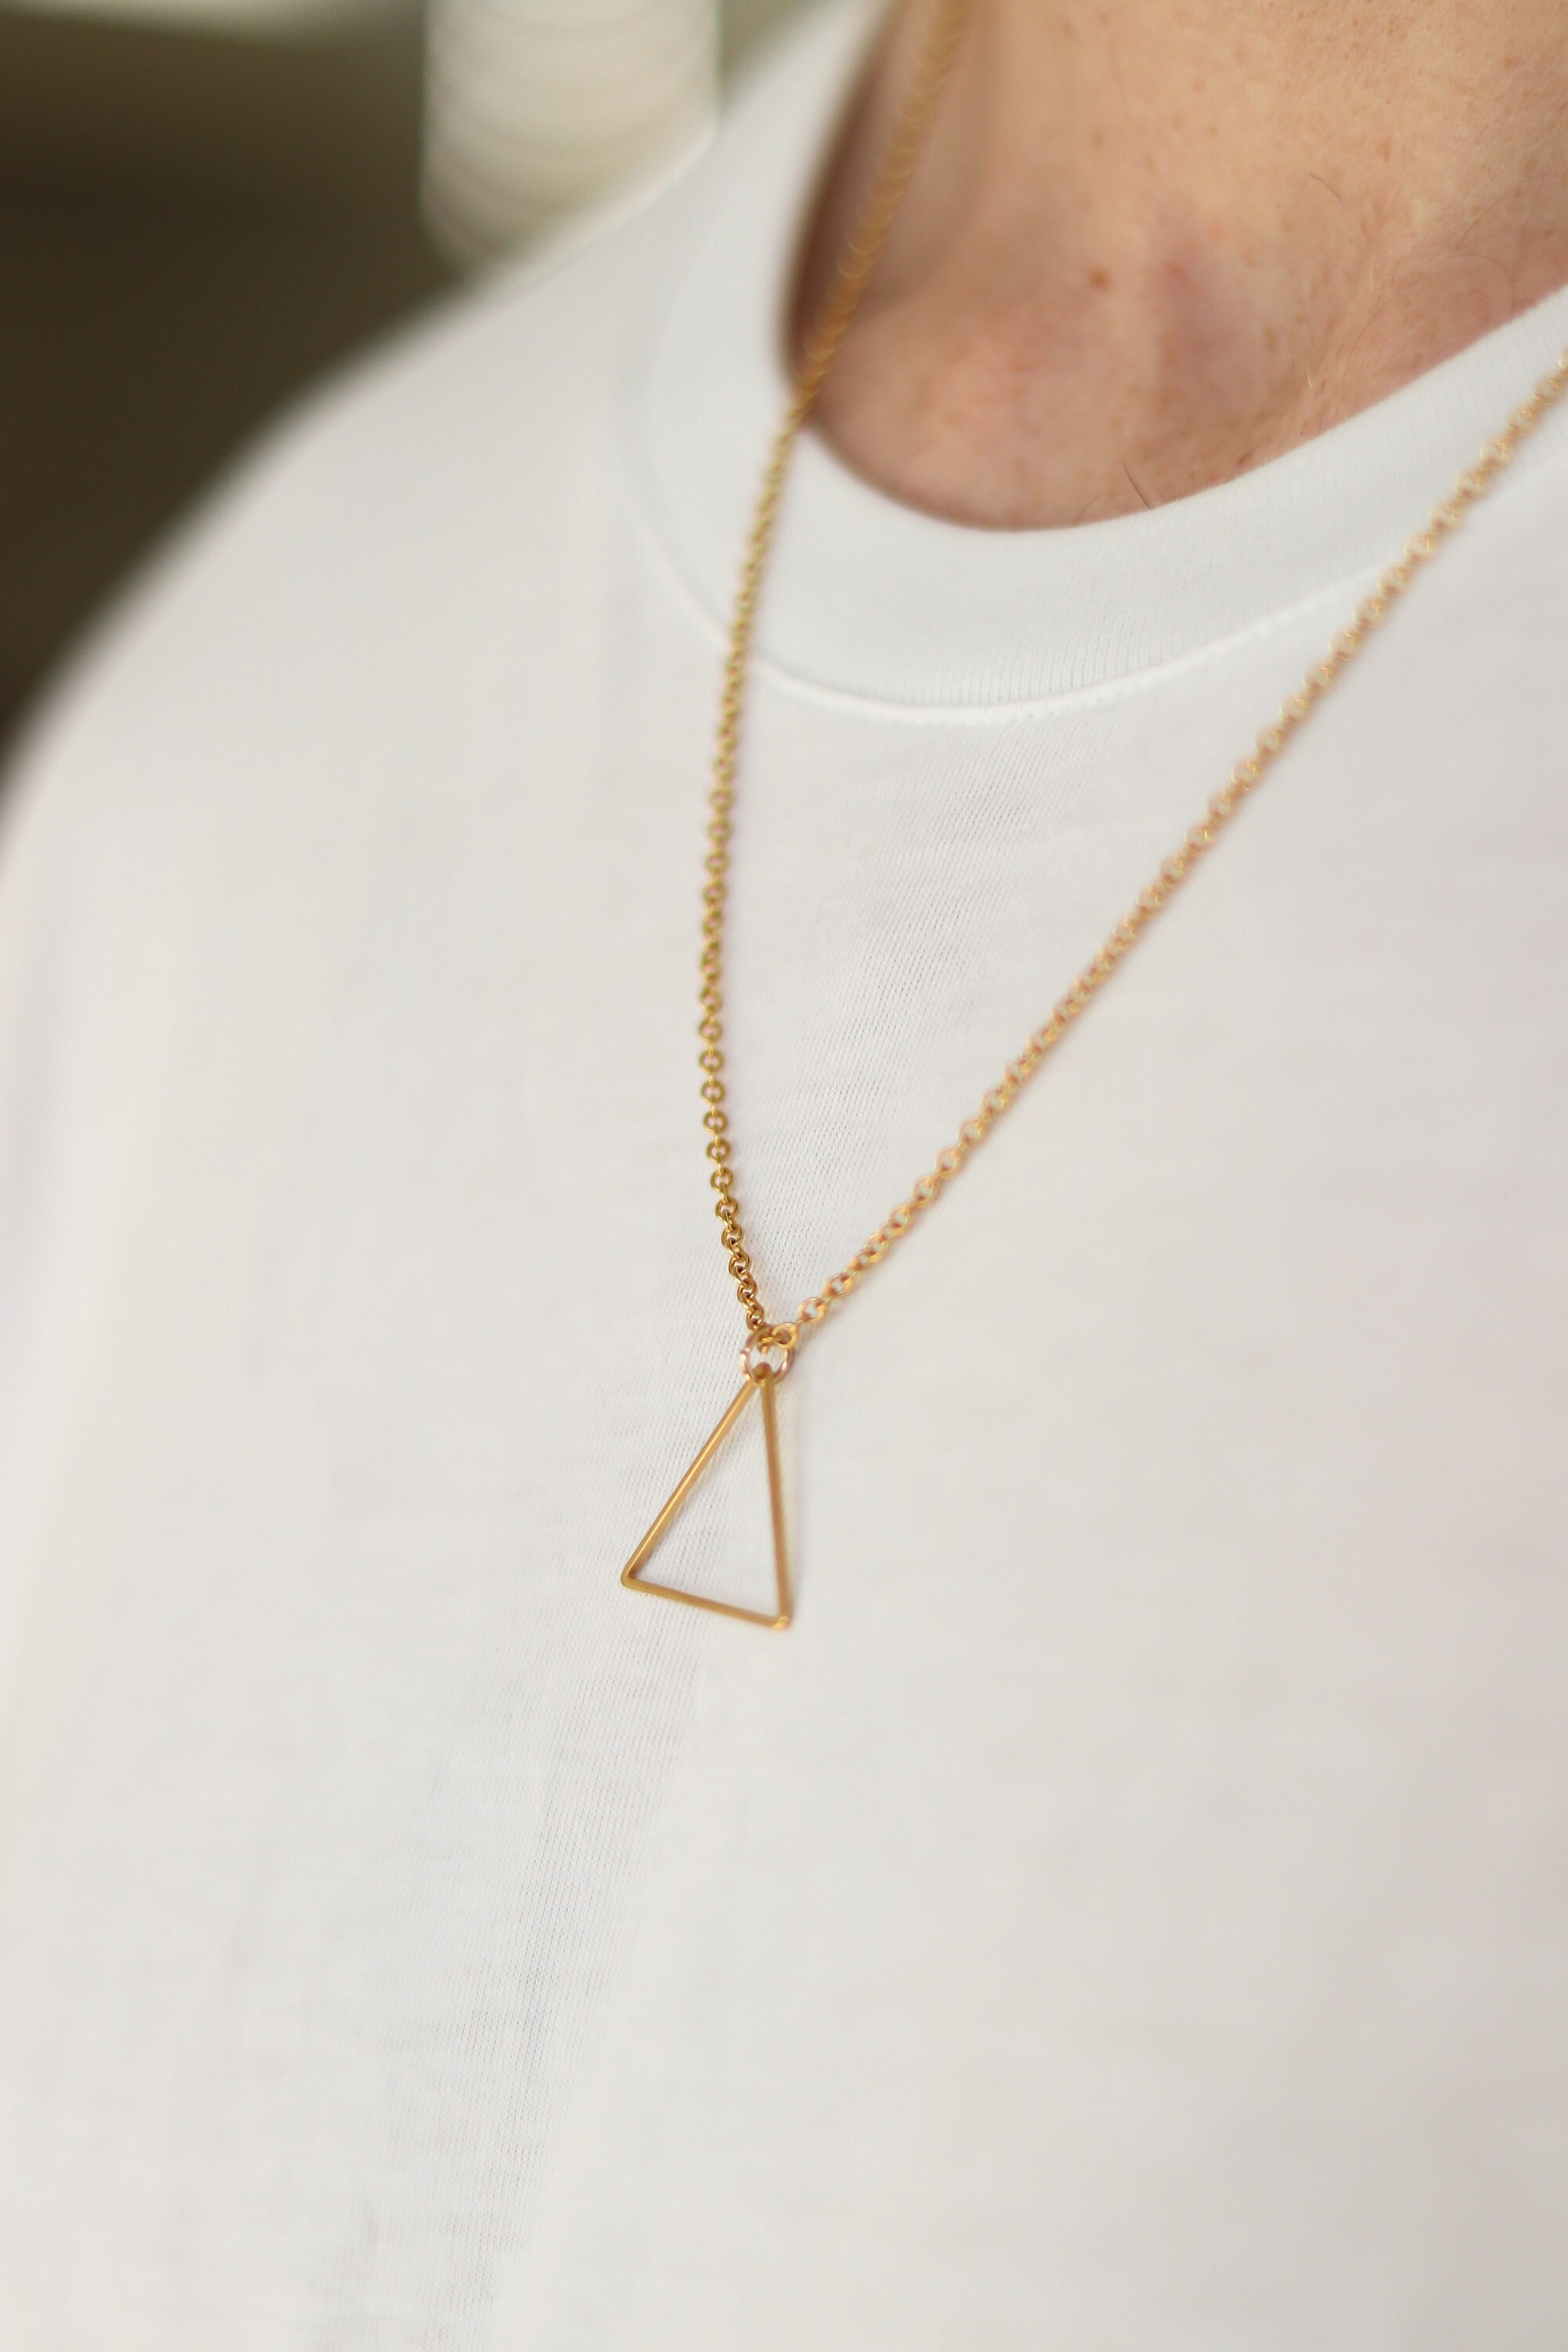 Triangle Necklace for Men Groomsmen Gift Men's Necklace - Etsy